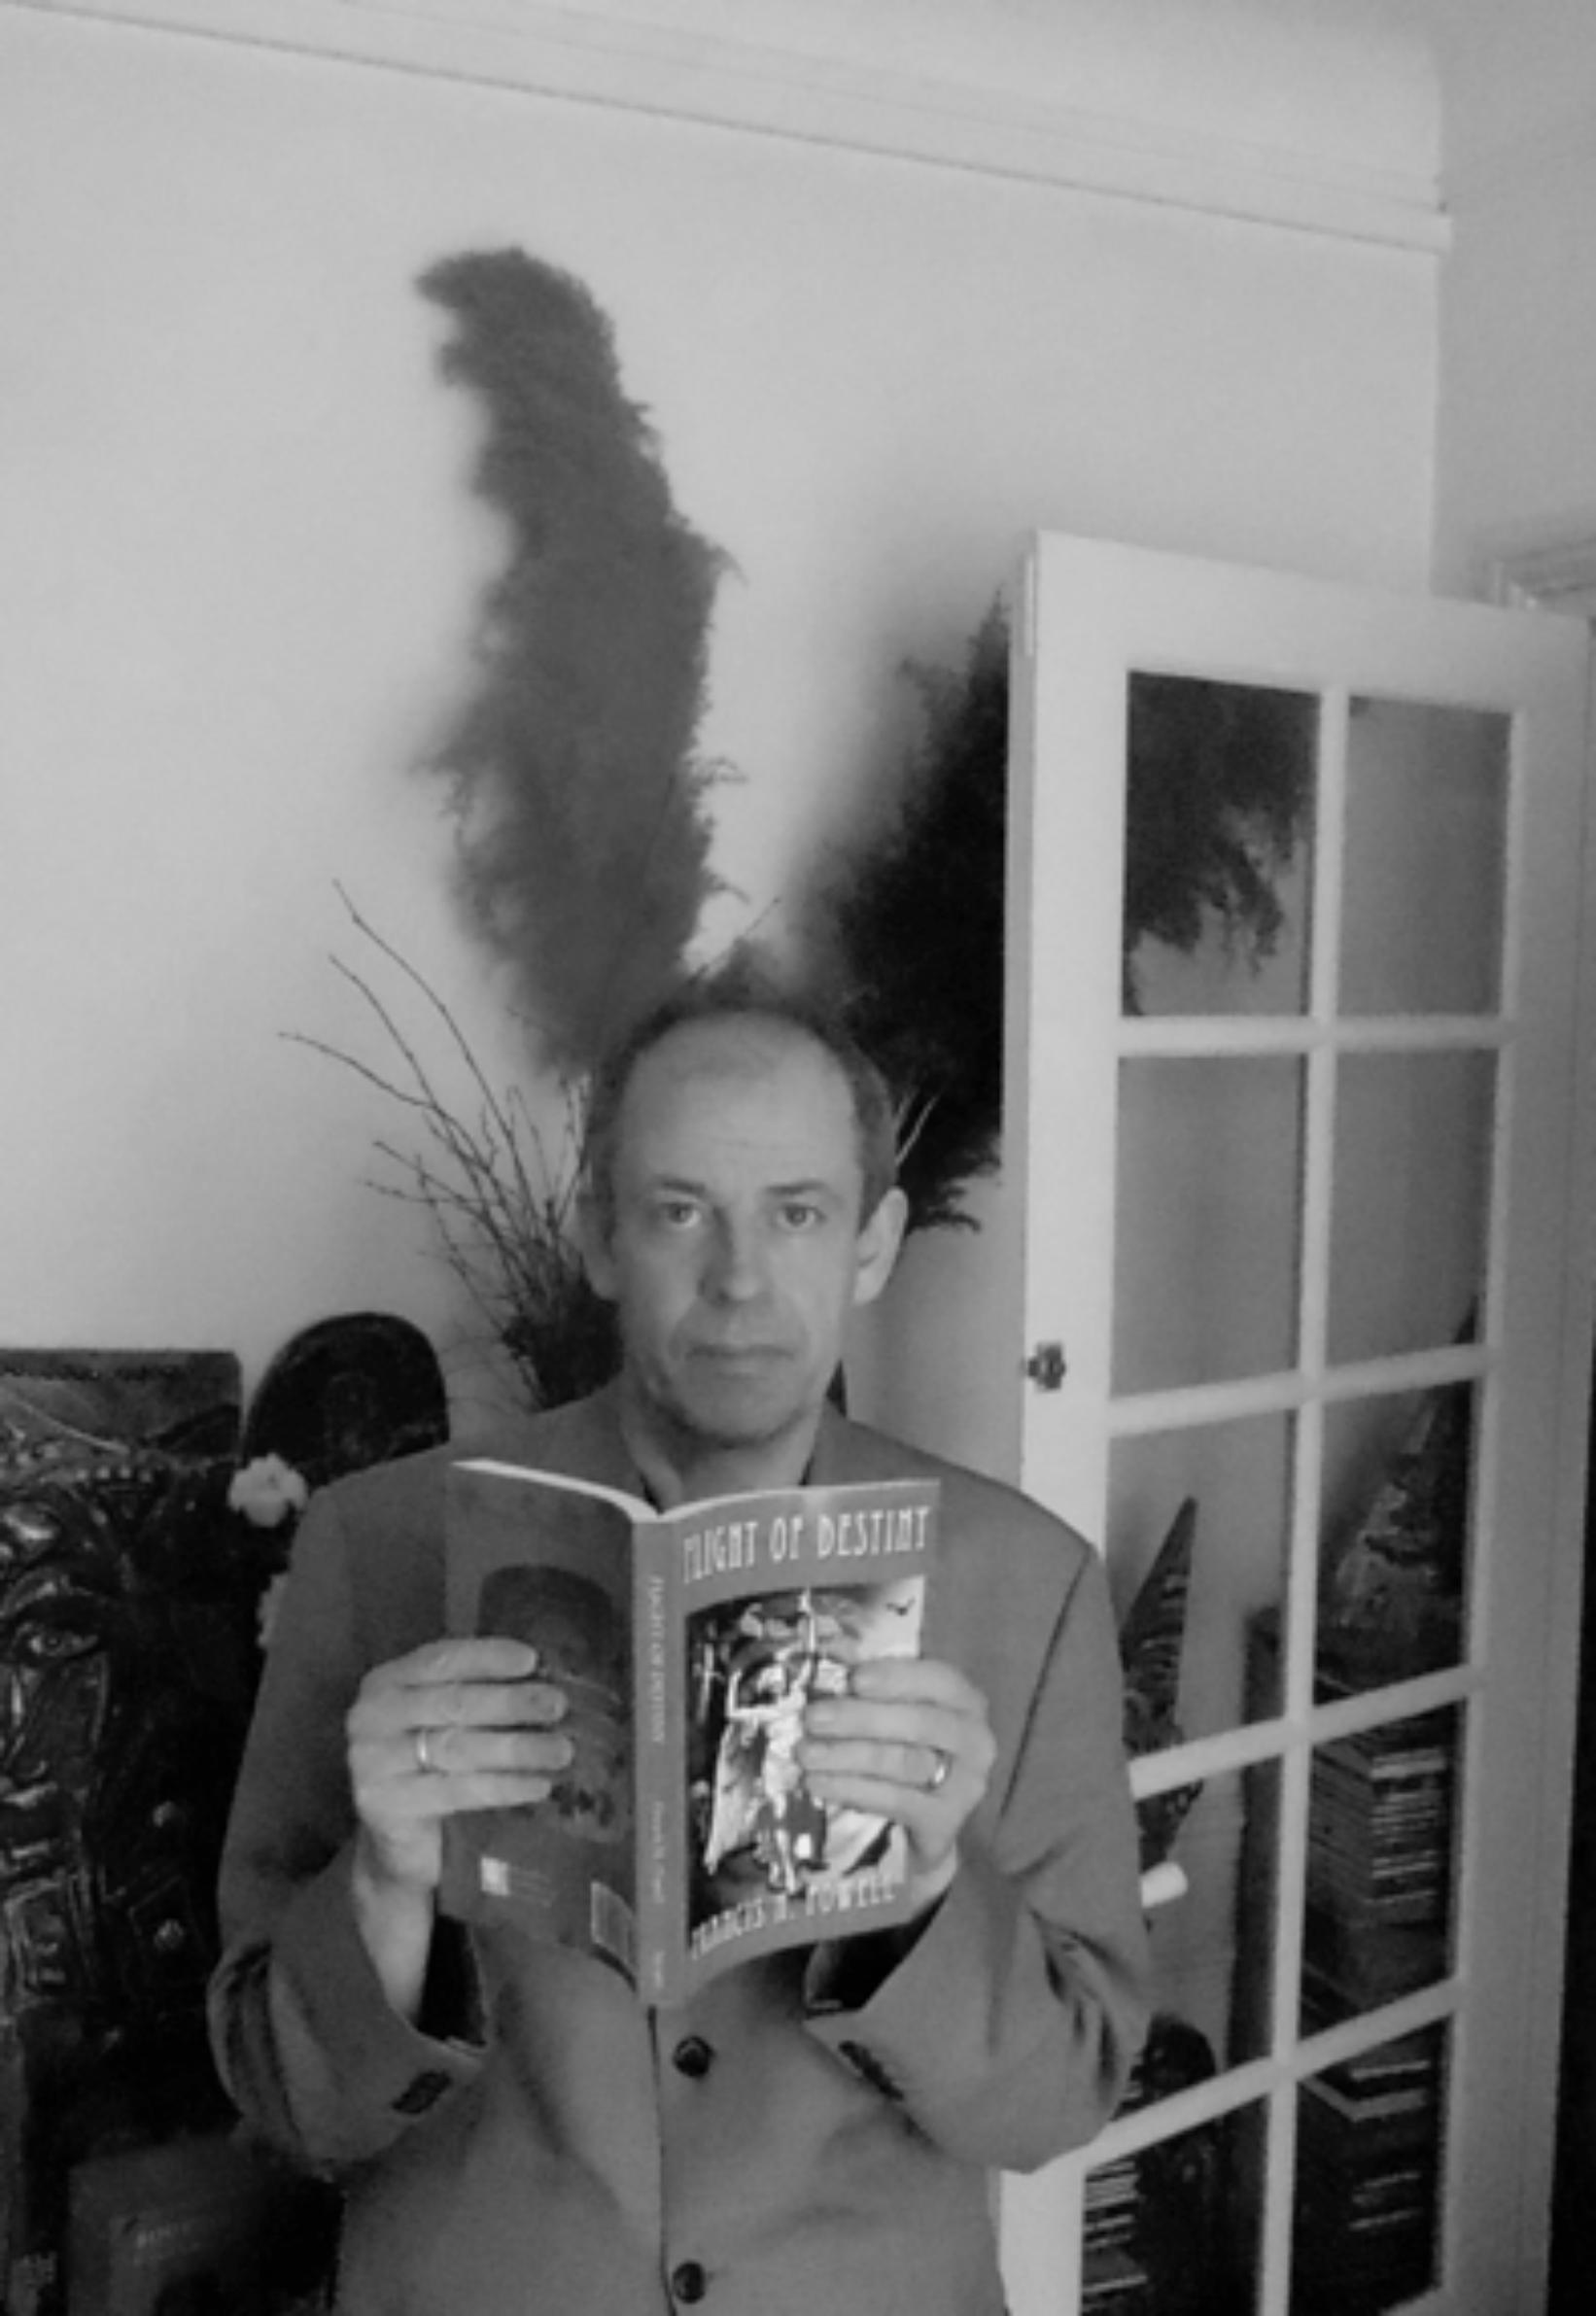 Author with book